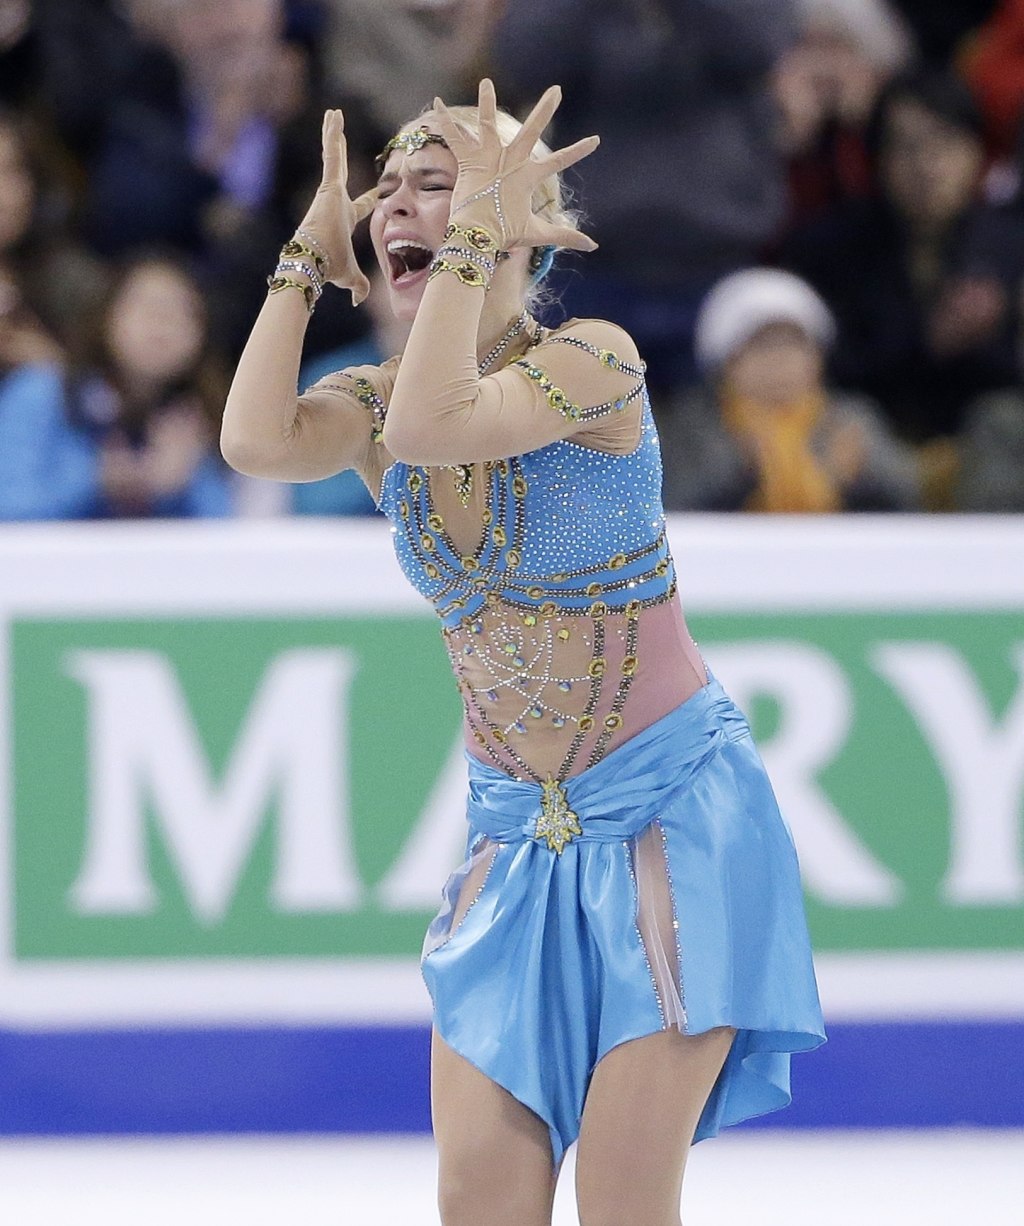 Anna Pogorilaya, of Russia, reacts after competing during the фото (photo)